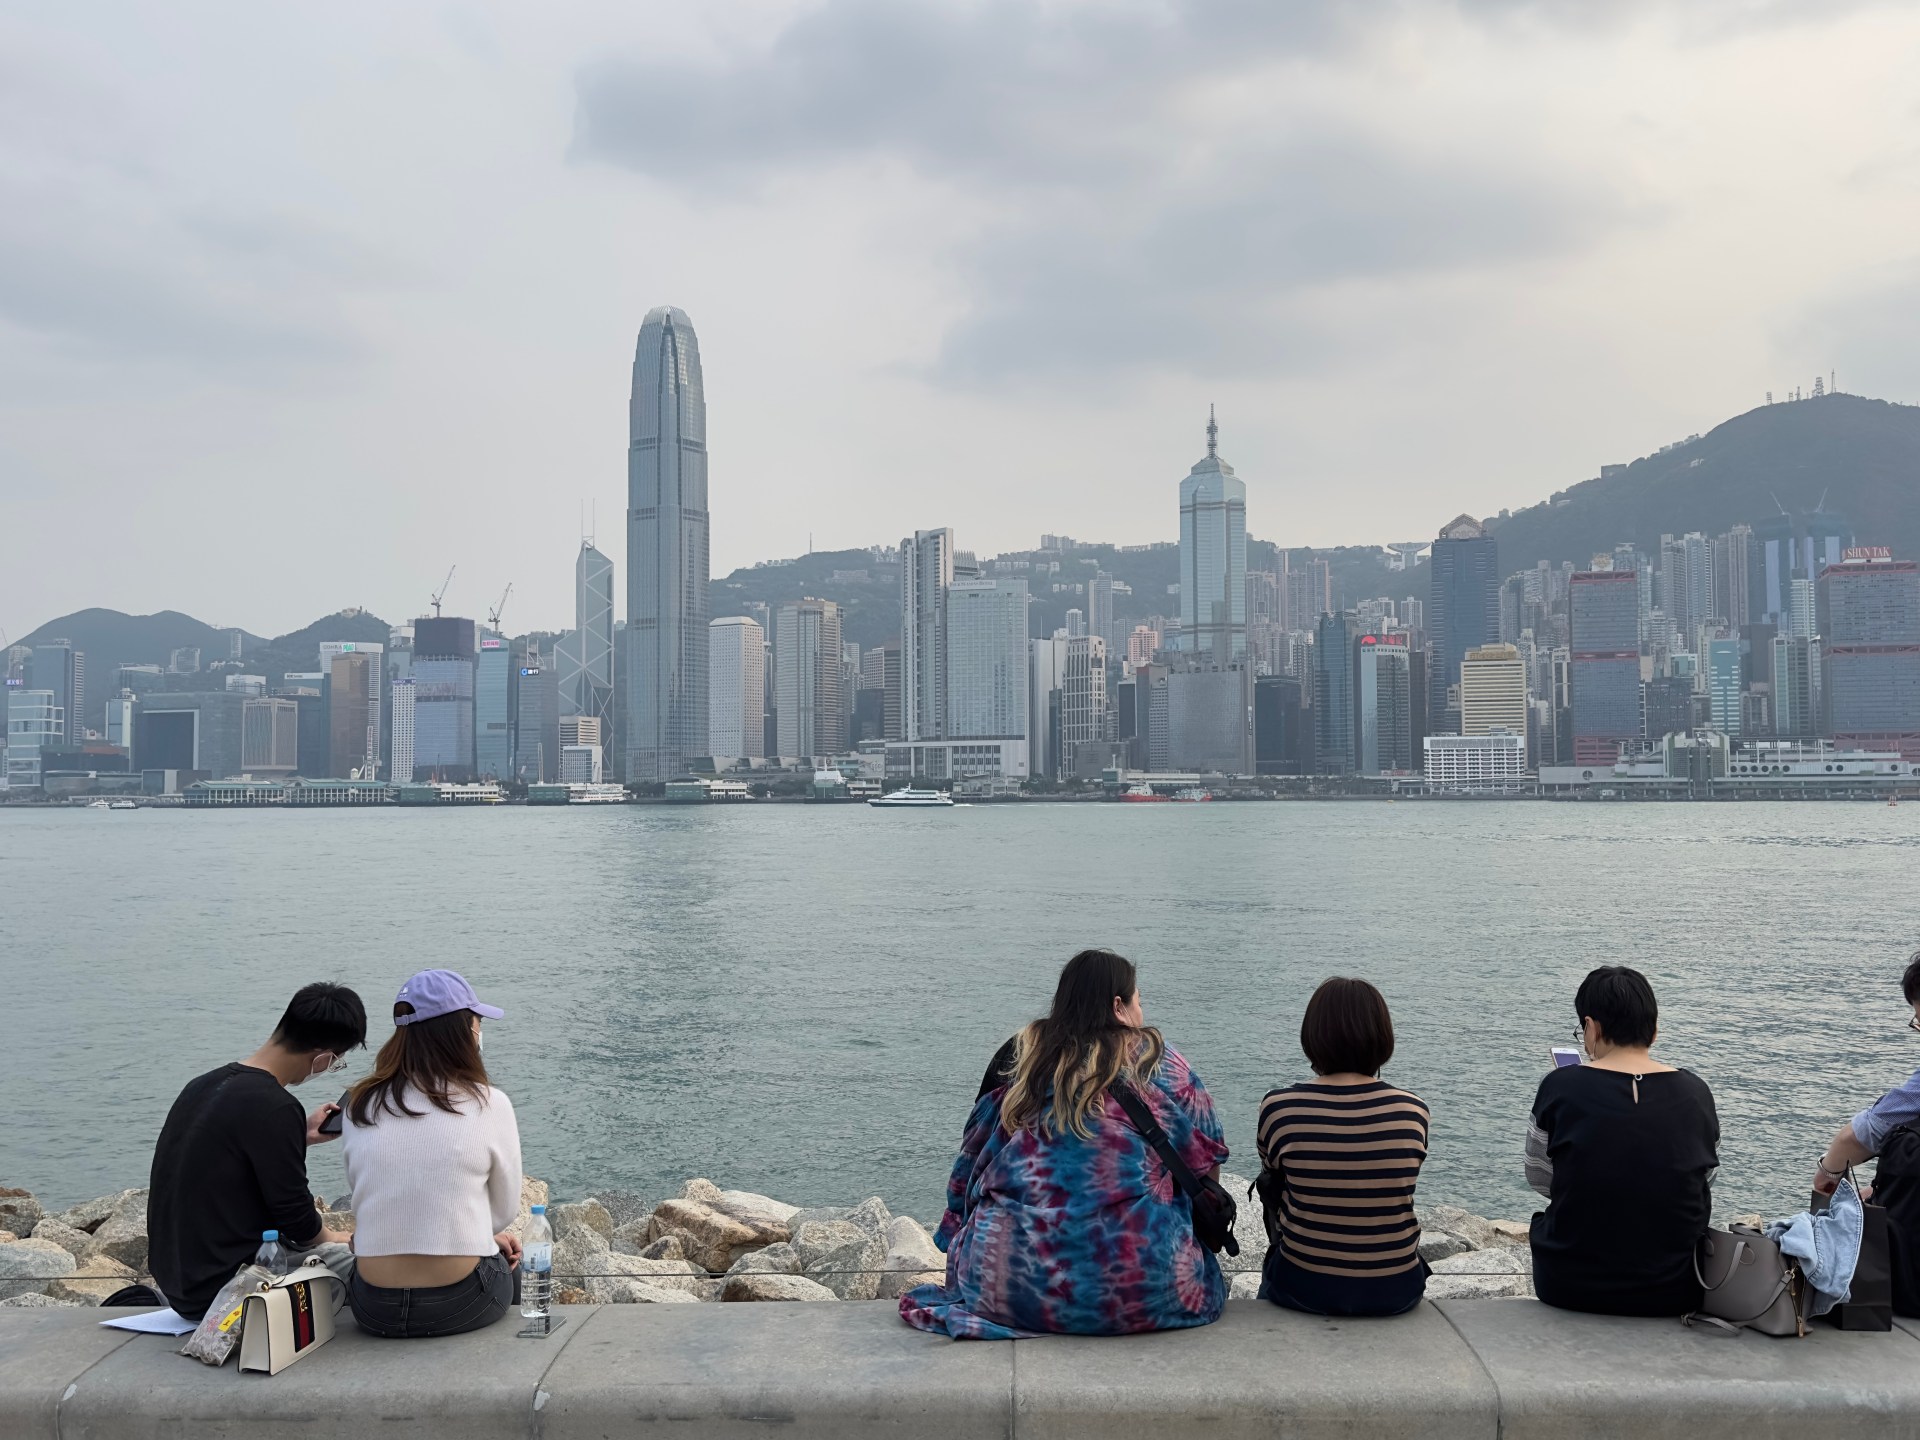 Hong Kong struggles to win back tourists, ‘World City’ crown | Business and Economy